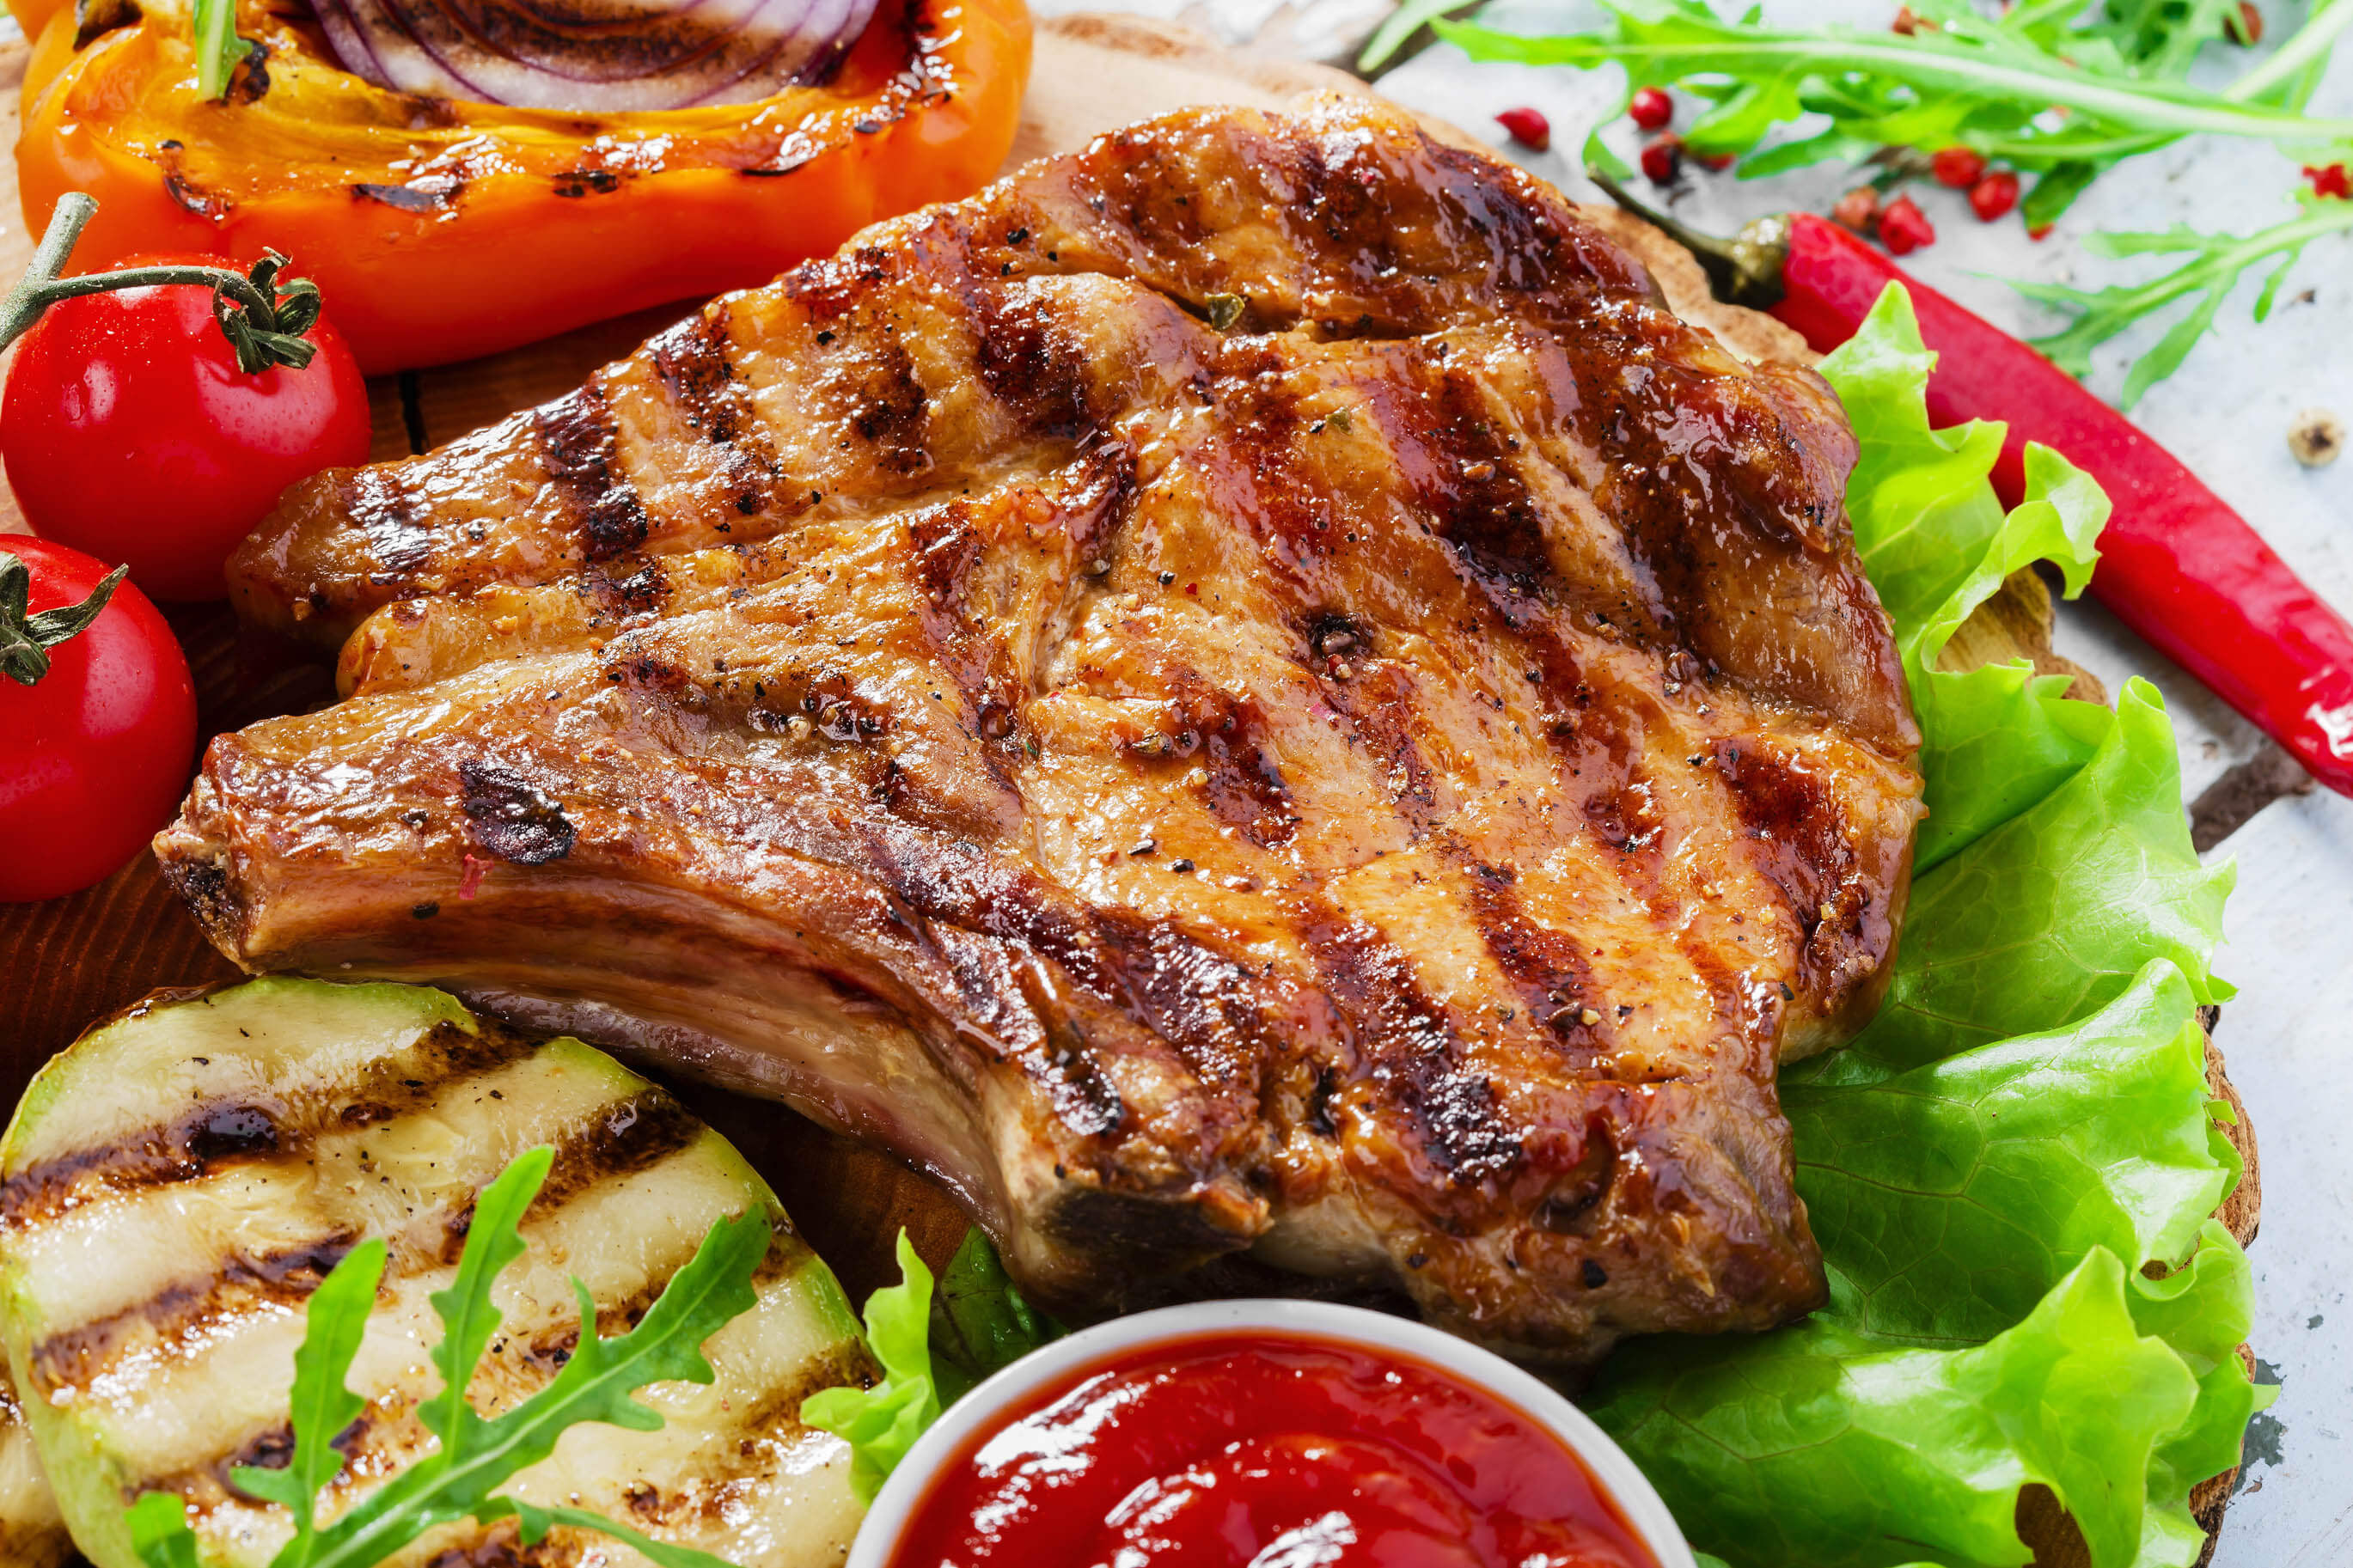 Healthy Grilled Pork Chops
 Genetic engineering could make pork heart healthy if not